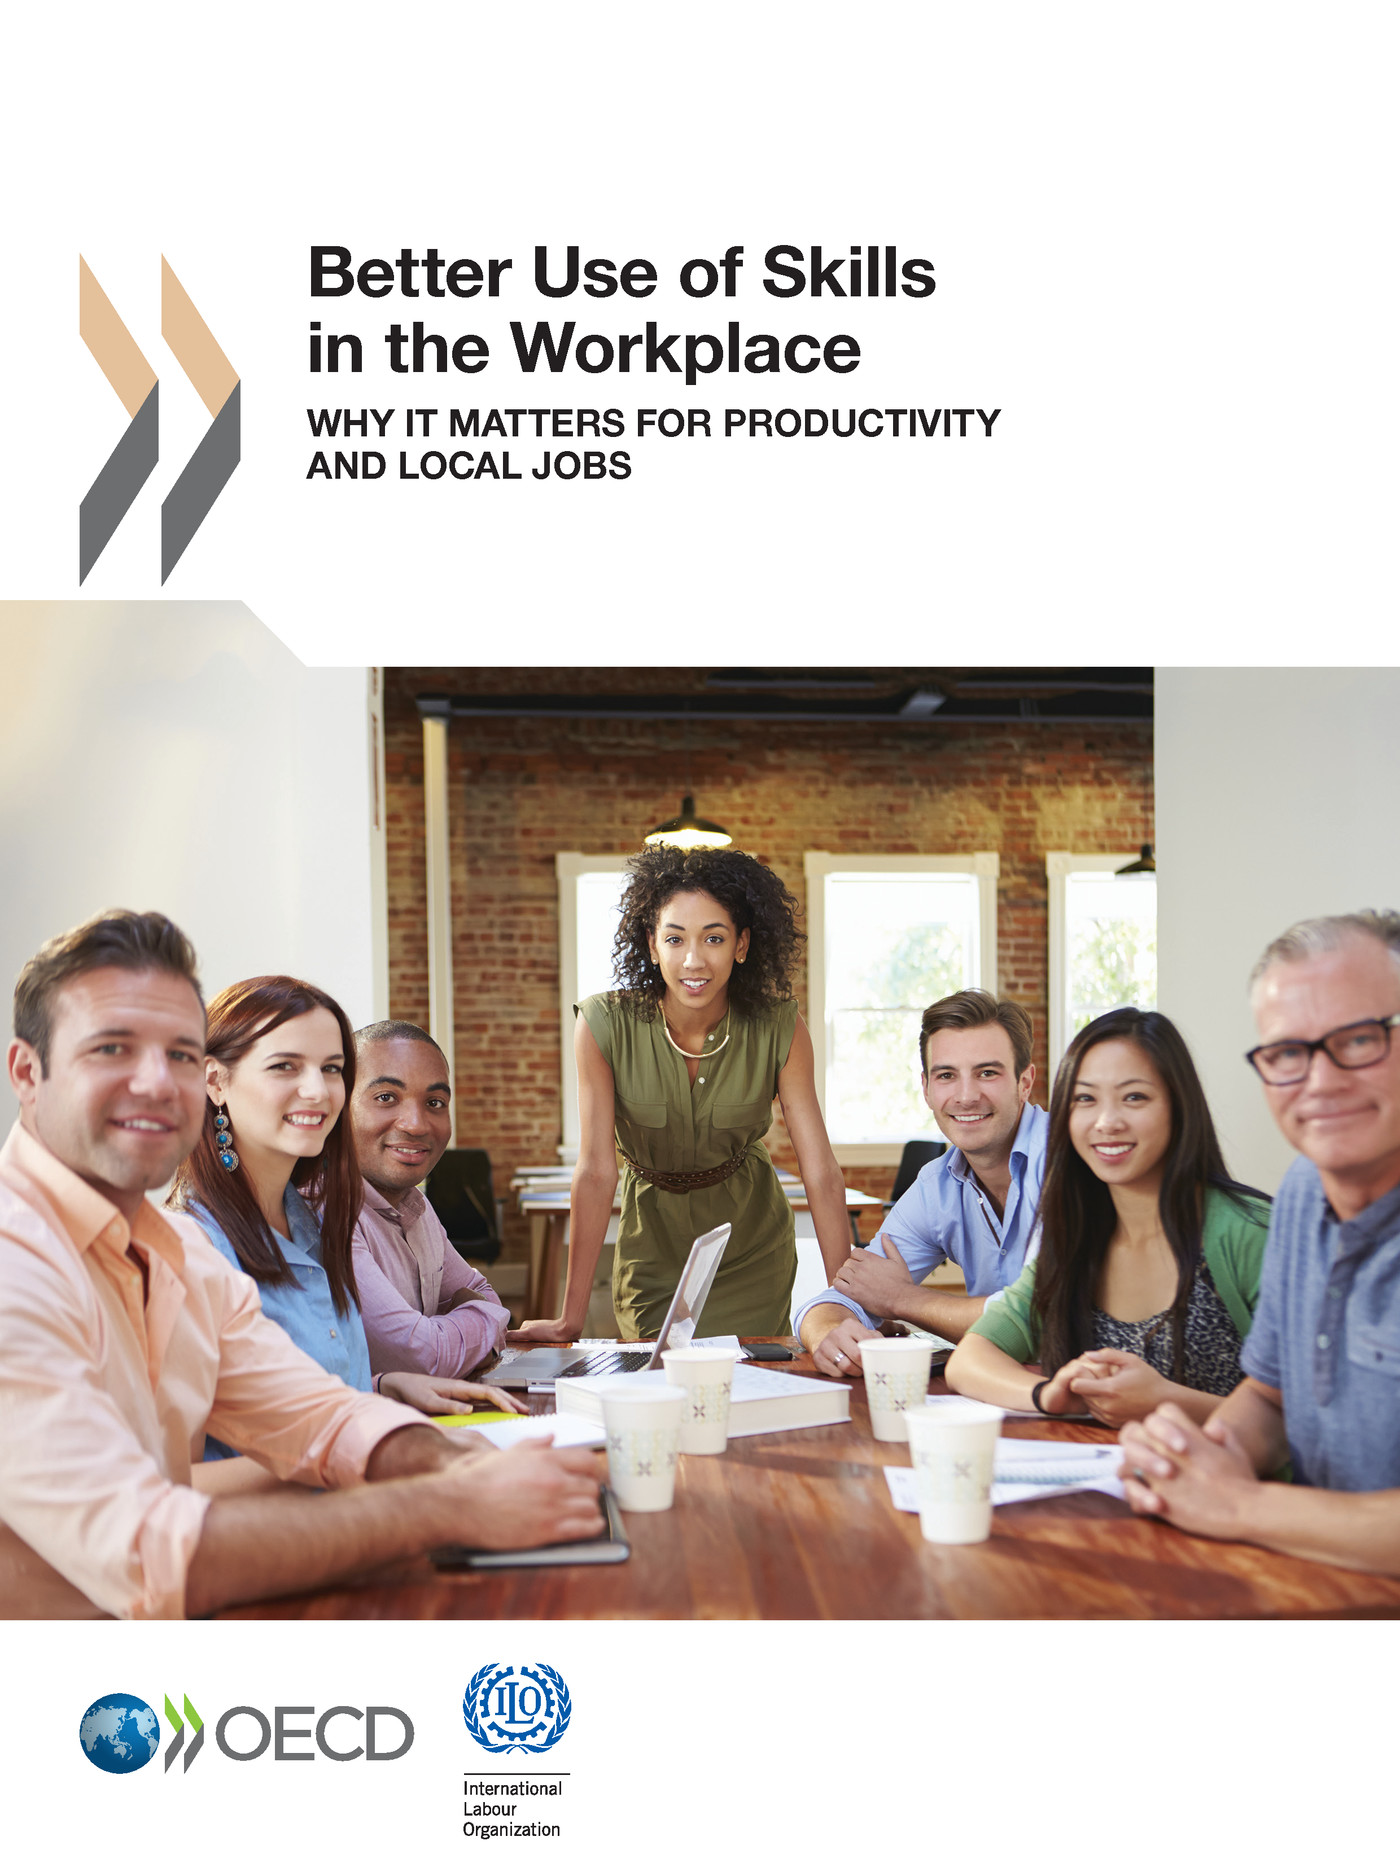 Better Use of Skills in the Workplace -  Collectif - OCDE / OECD